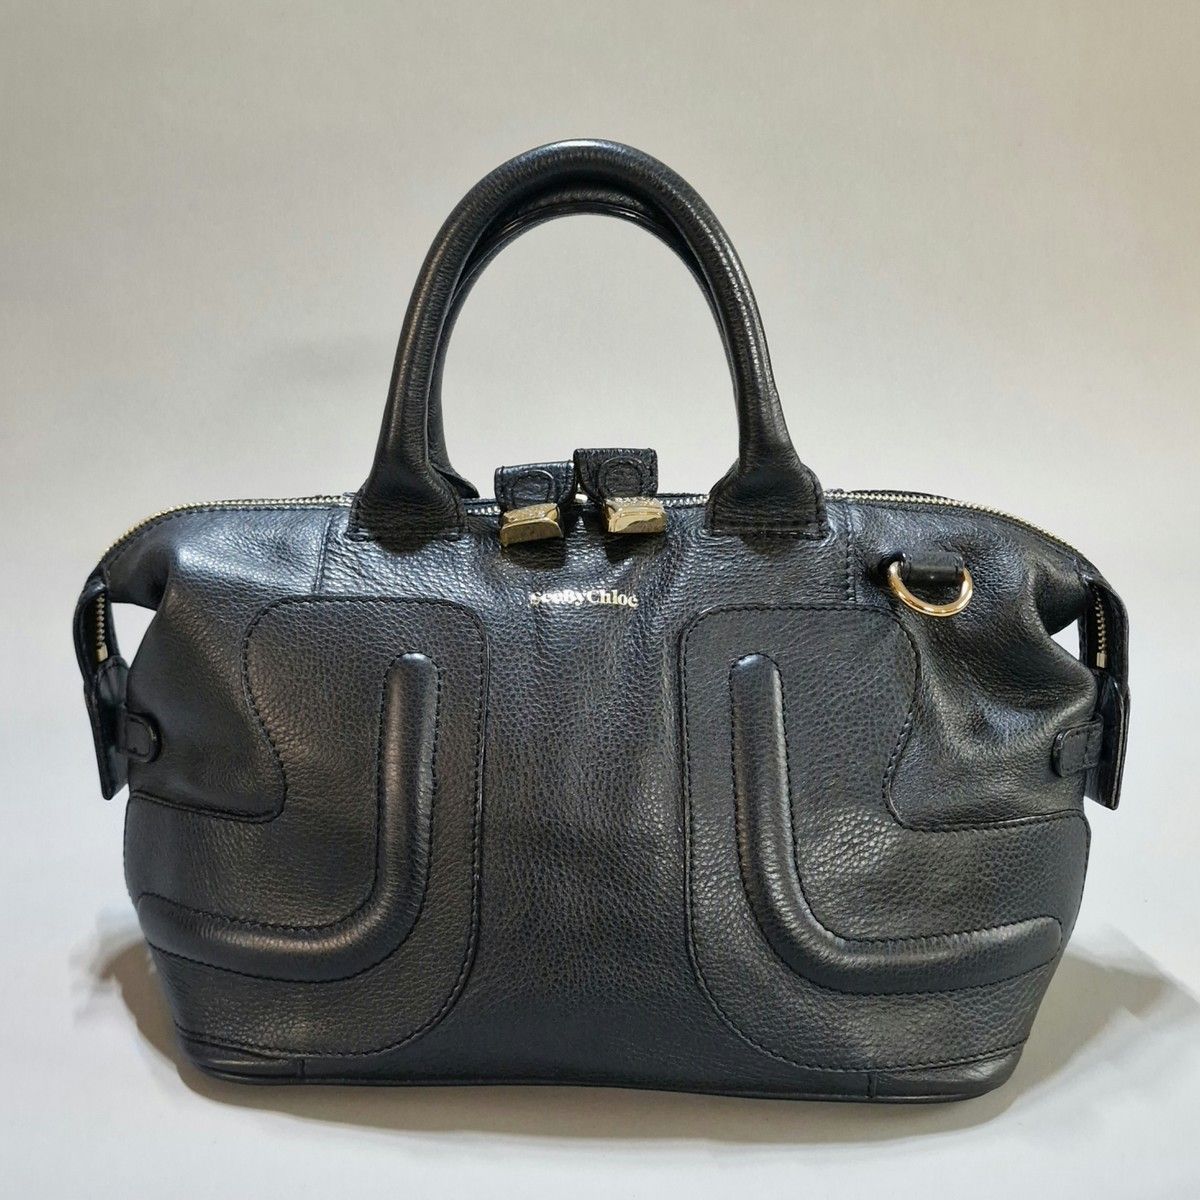 Null SEE BY CHLOE - SMALL BAG 35 cm in black leather with zipper closure
TBE